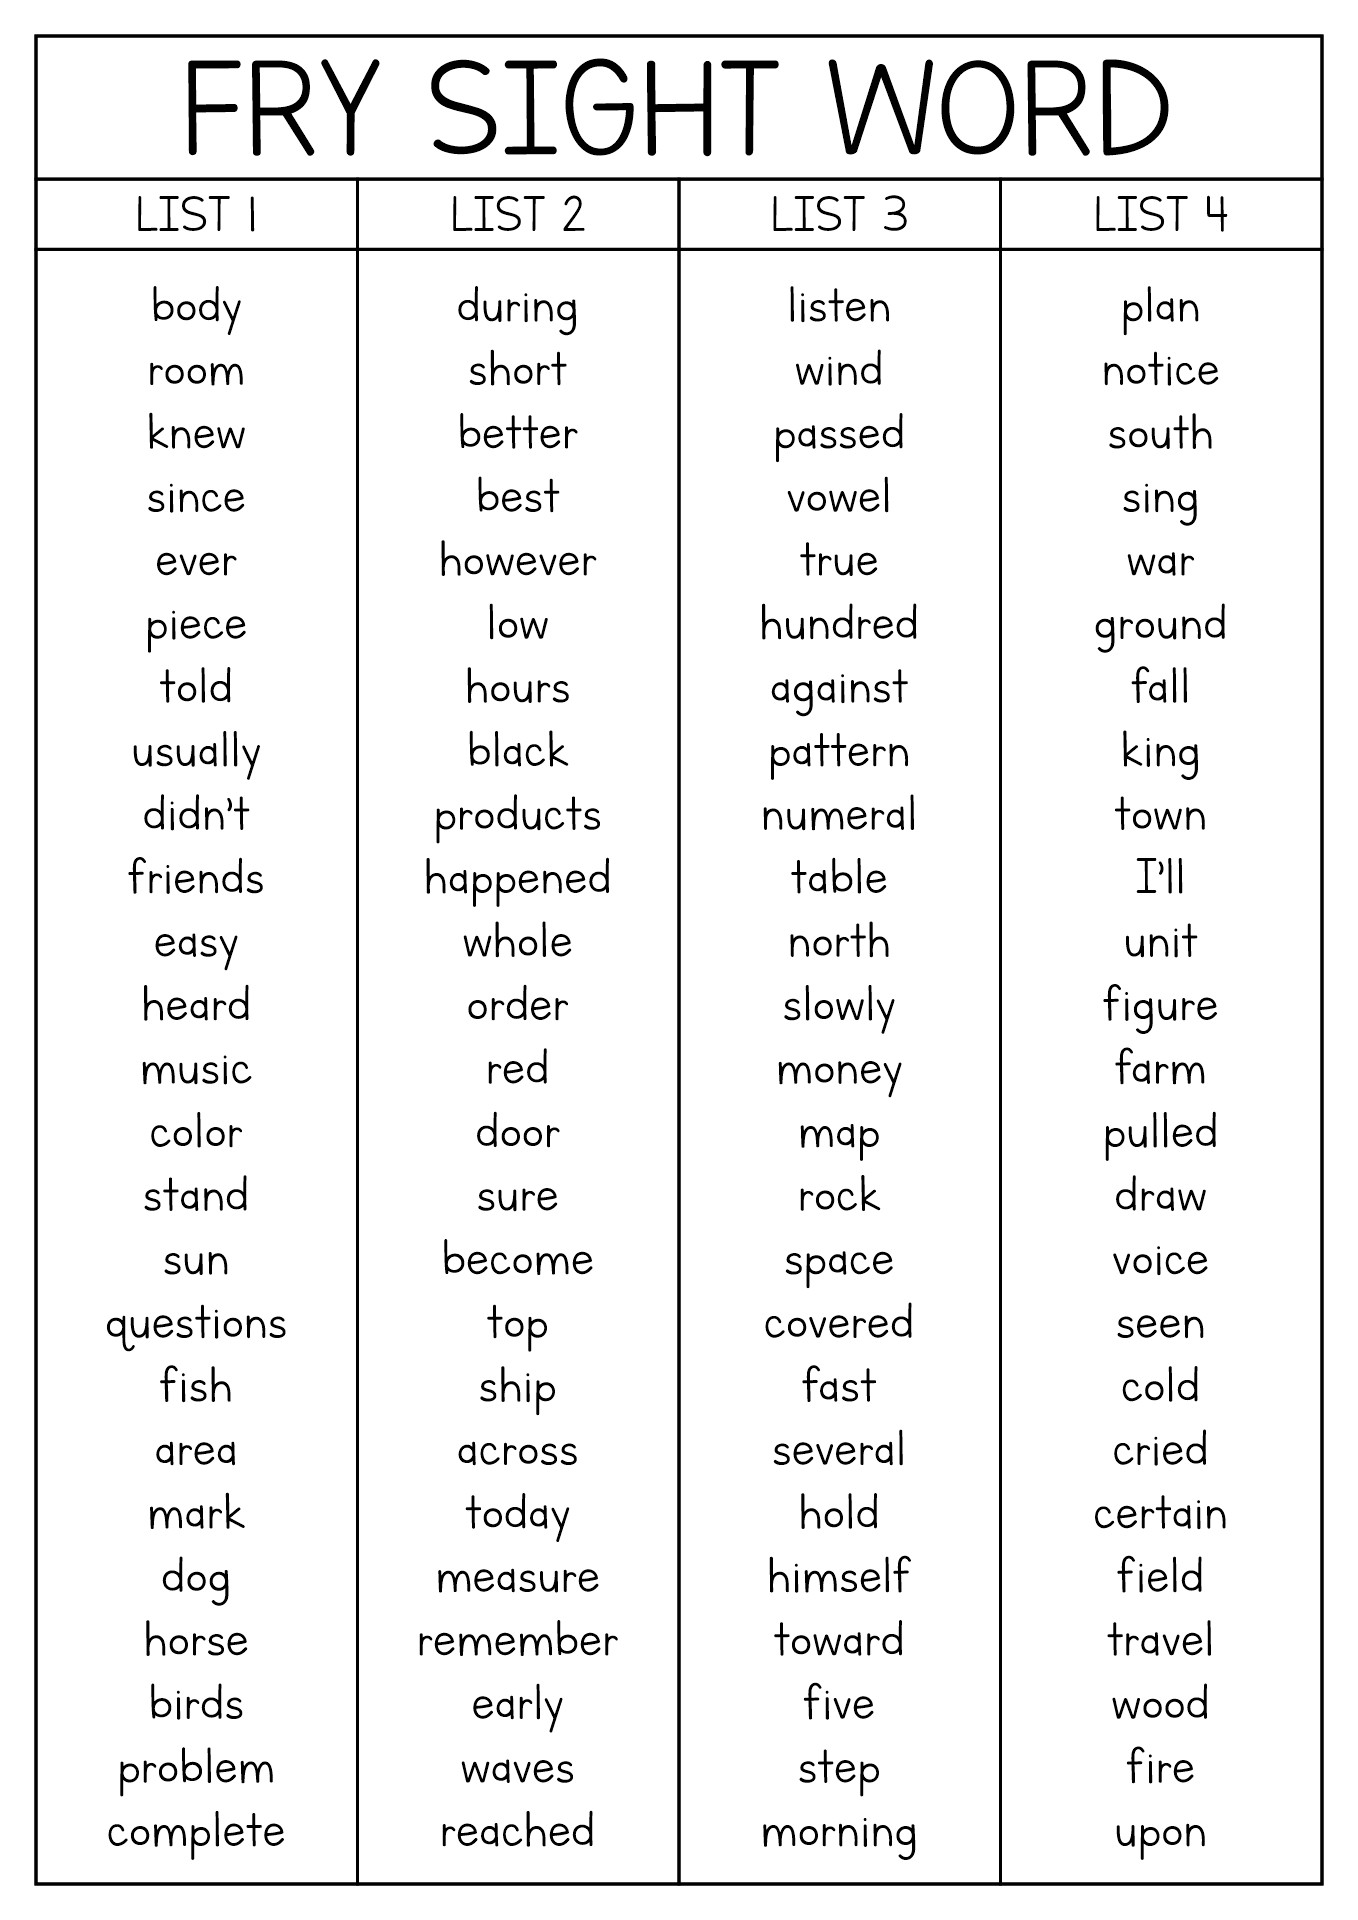 19-best-images-of-fry-s-first-100-words-worksheets-100-fry-sight-word